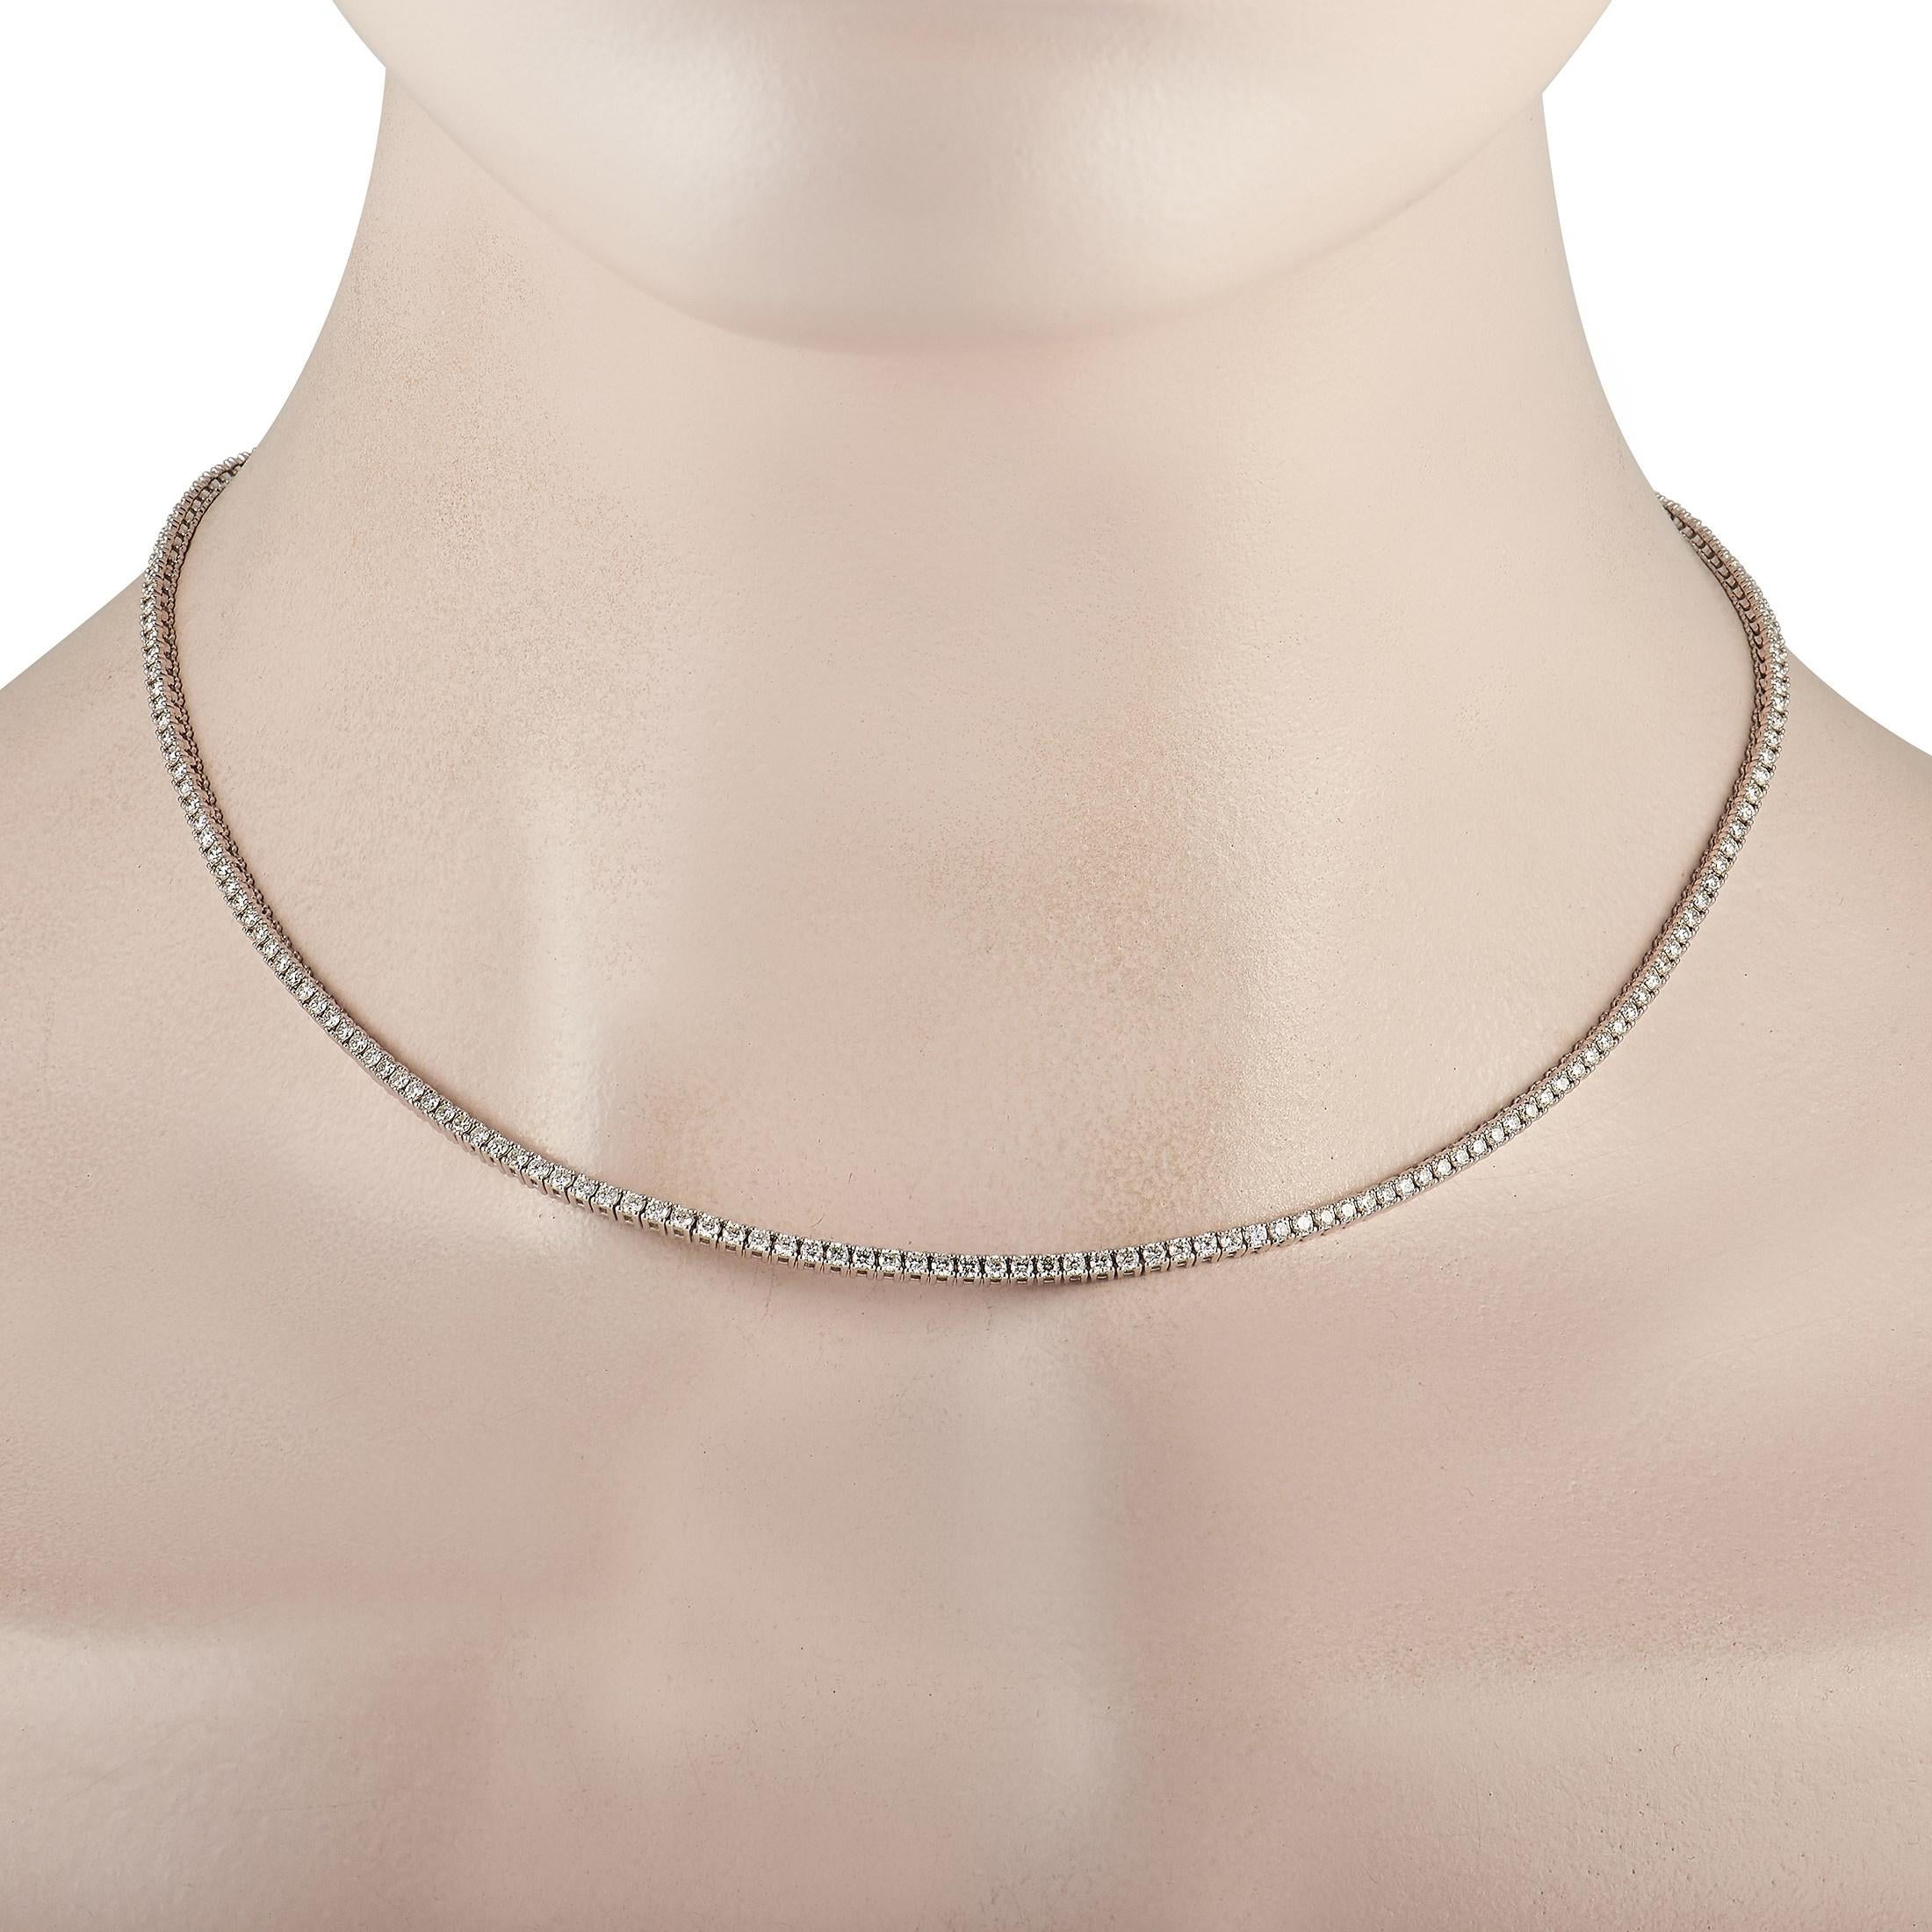 Elevate any ensemble by adding this impeccably designed necklace. Crafted from 18K White Gold, this elegant, understated accessory features a sleek setting measuring 17.5” long. Diamonds with a total weight of 4.37 carats make it simply